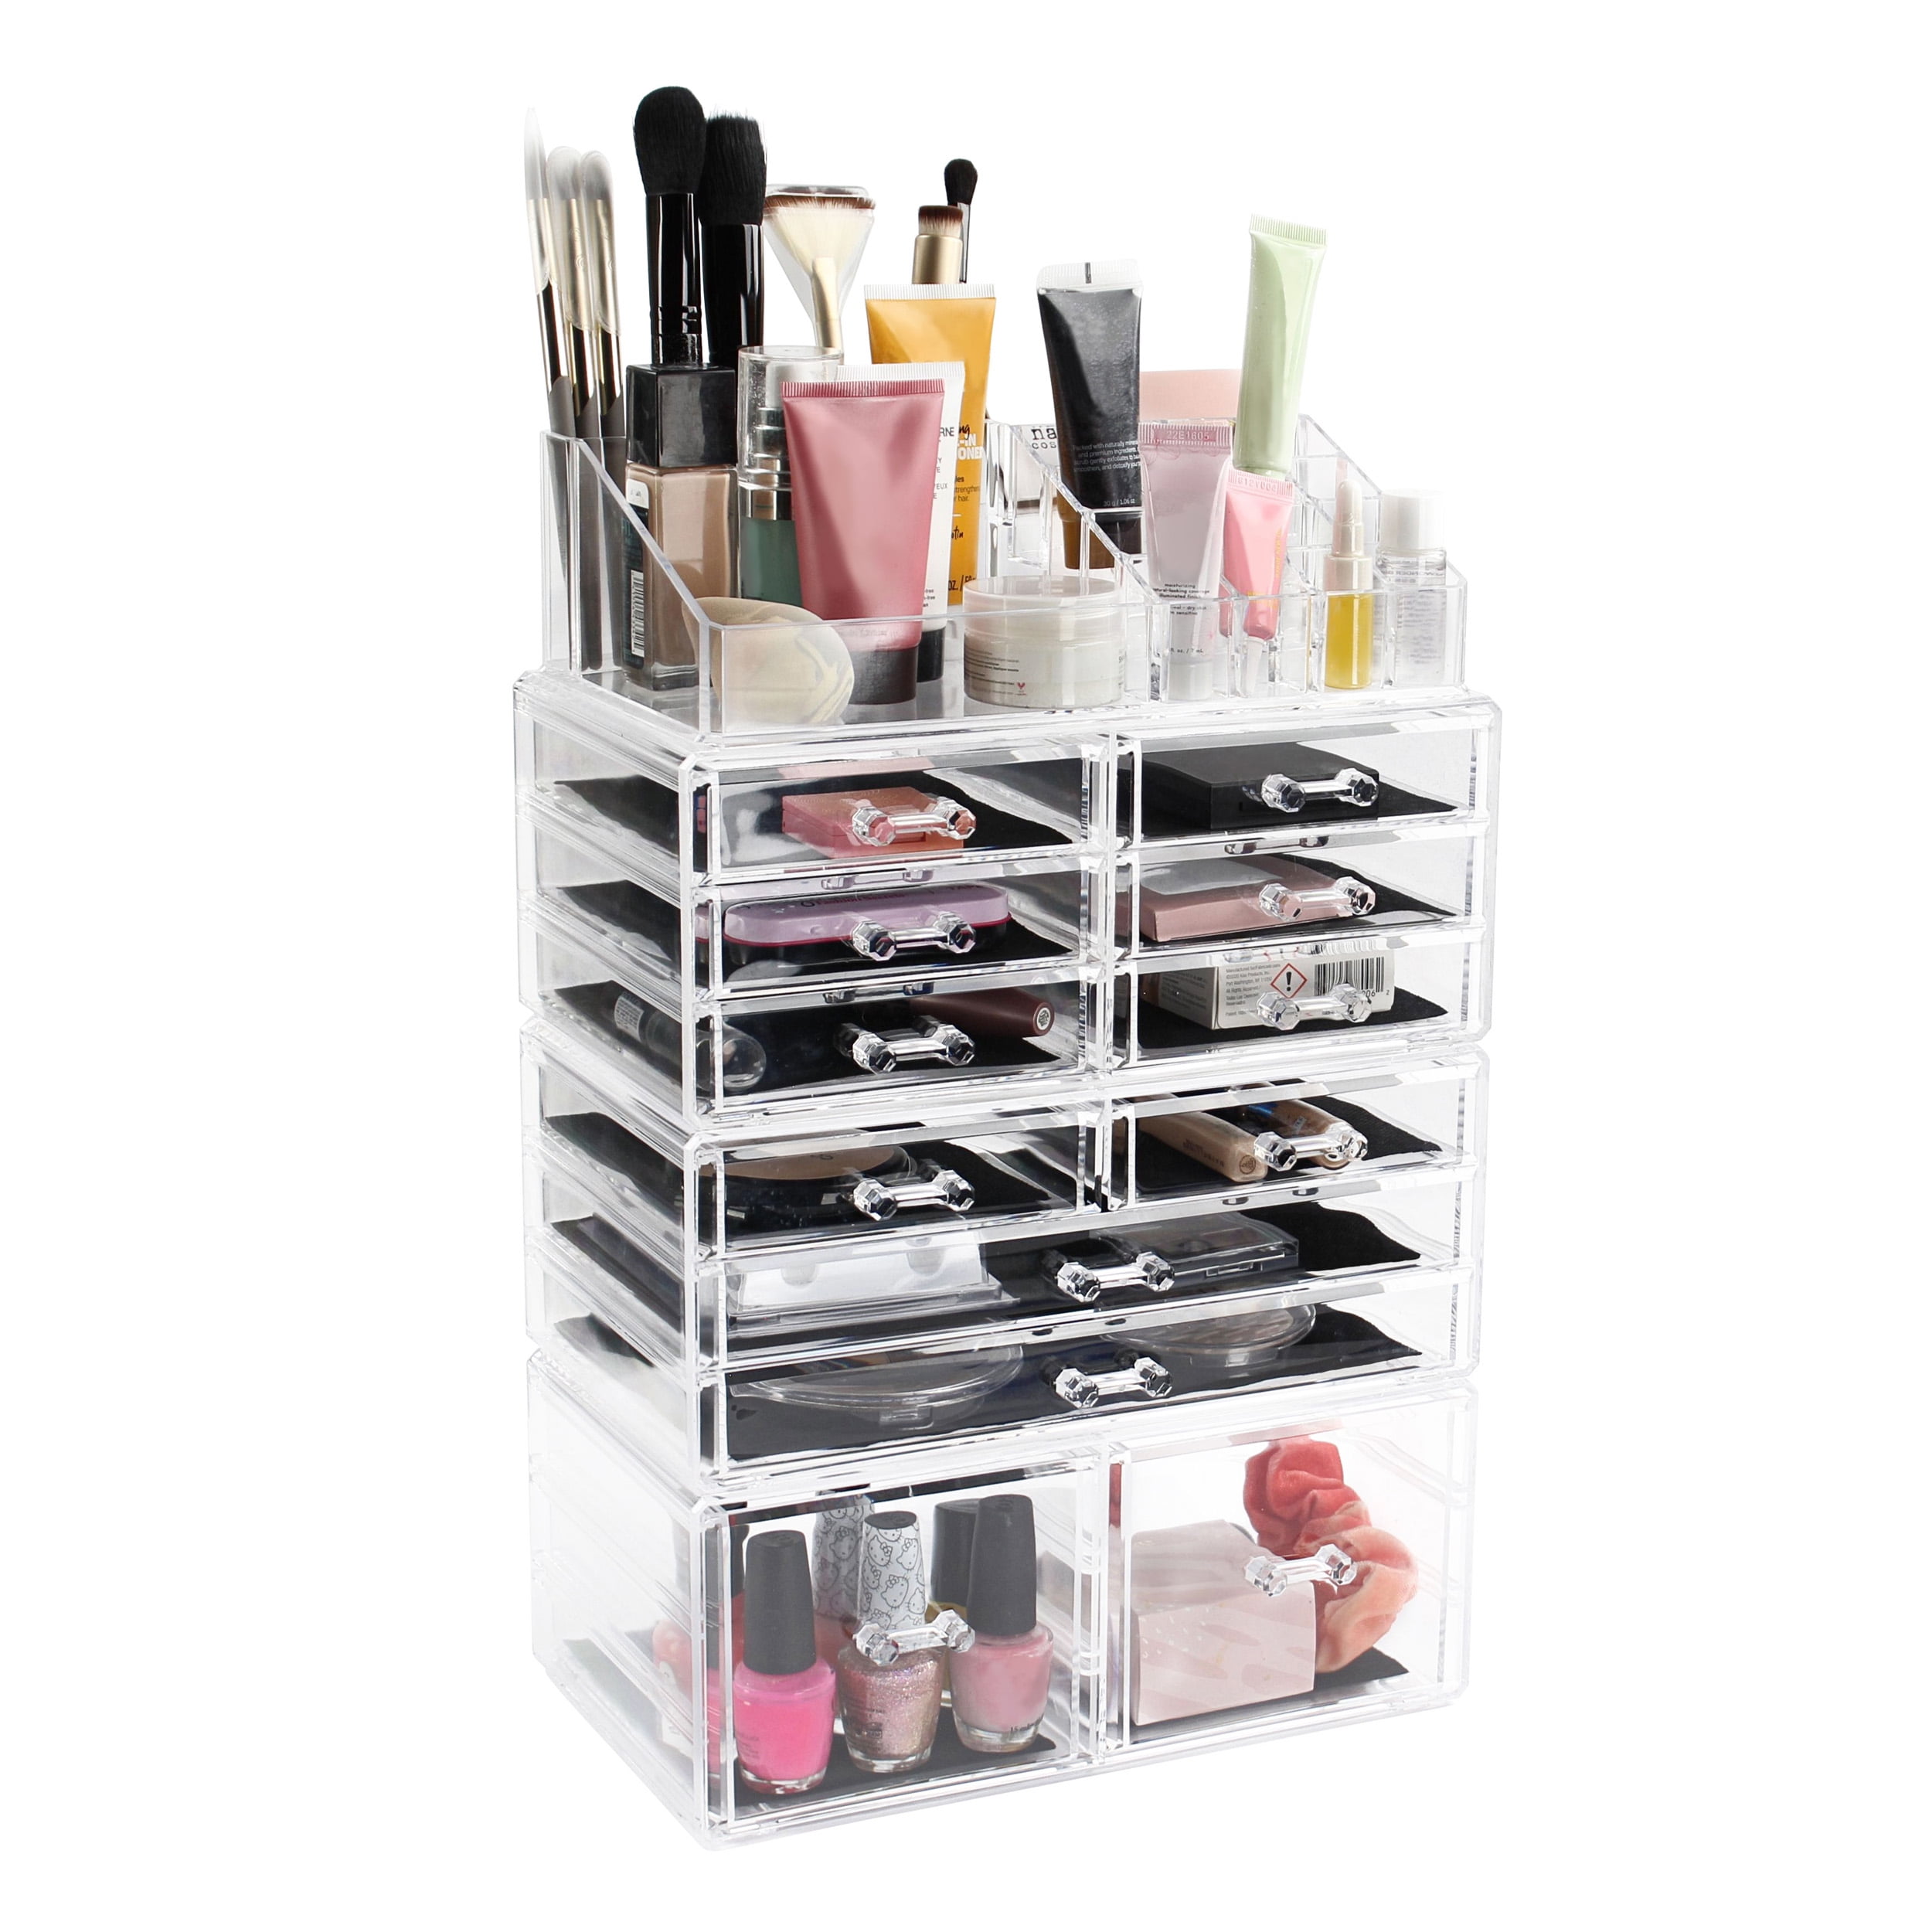  Cq acrylic 2PCS Clear Containers for Organizing 7 Drawers  Stackable Dresser Bathroom Organizers And Storage For Jewelry Hair  Accessories Nail Polish Lipstick Make up Marker Pen : Beauty & Personal Care